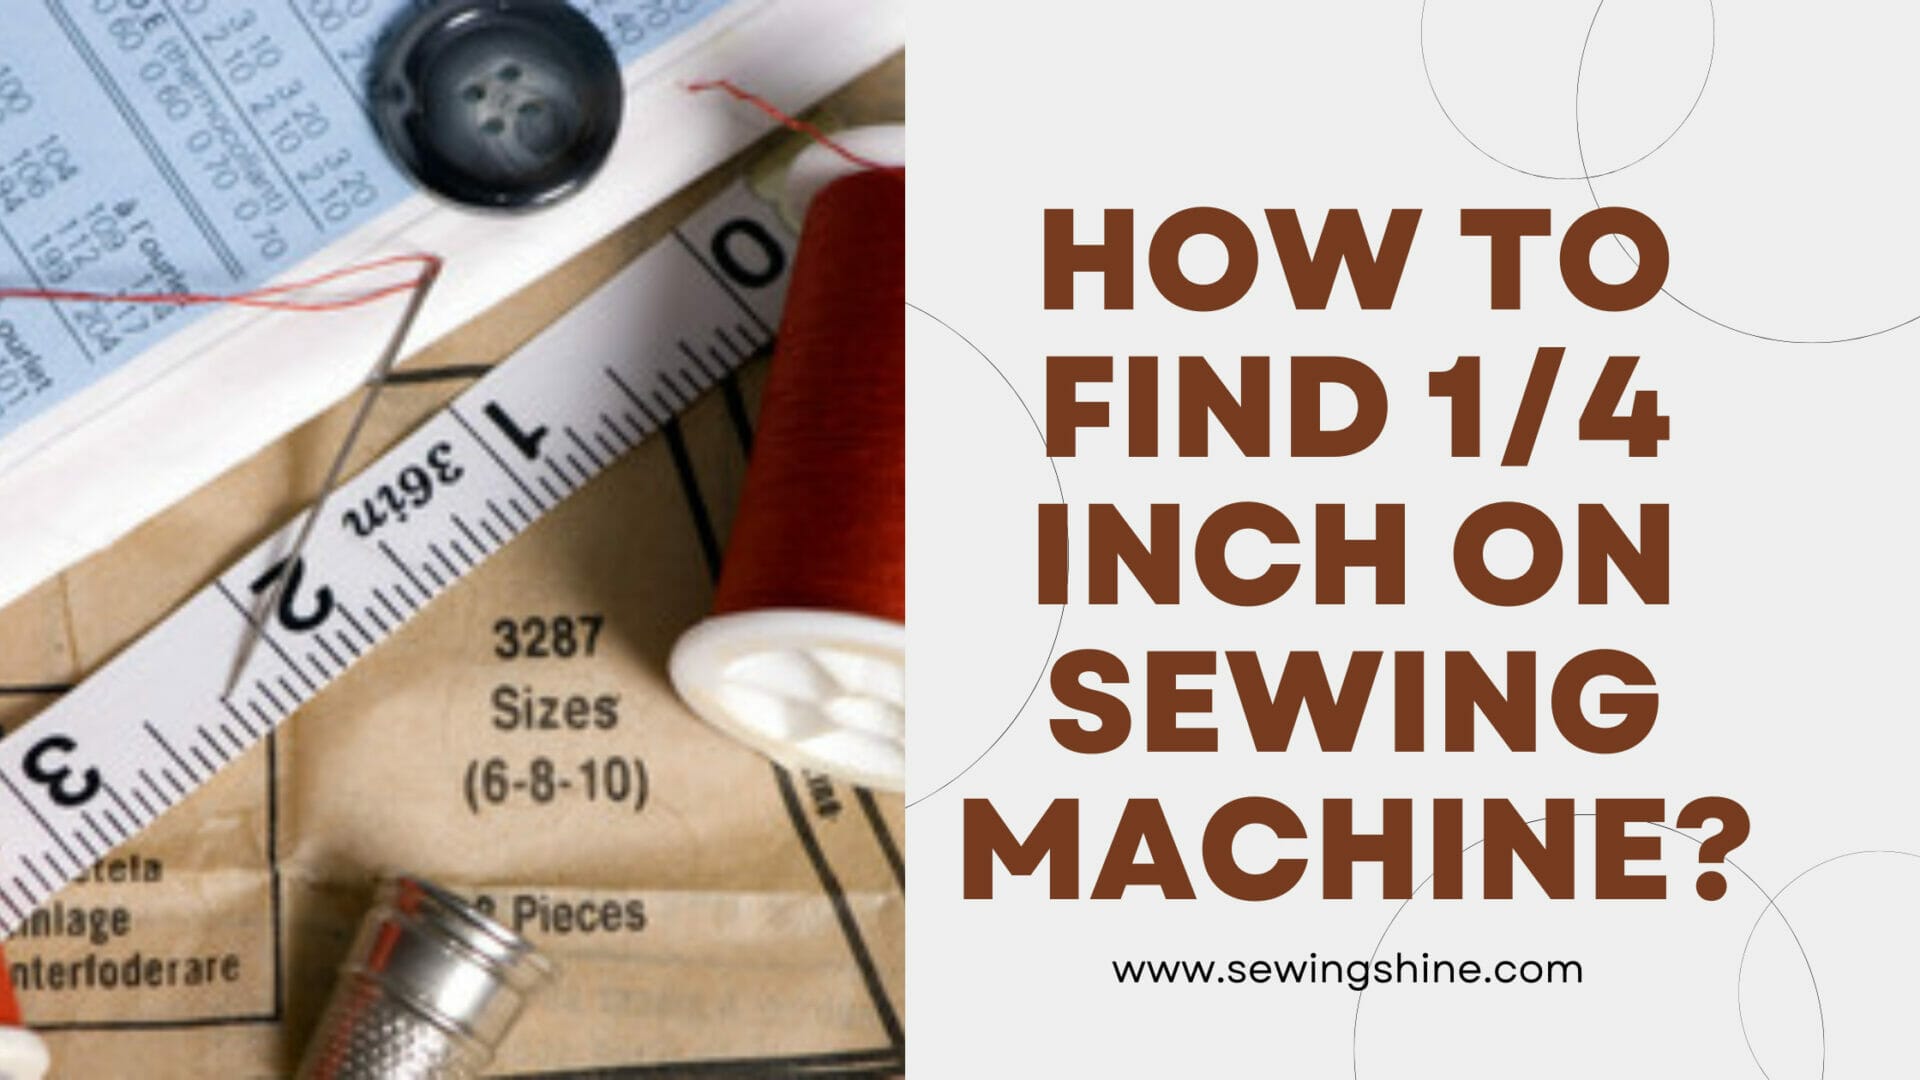 Find 1/4 Inch On A Sewing Machine